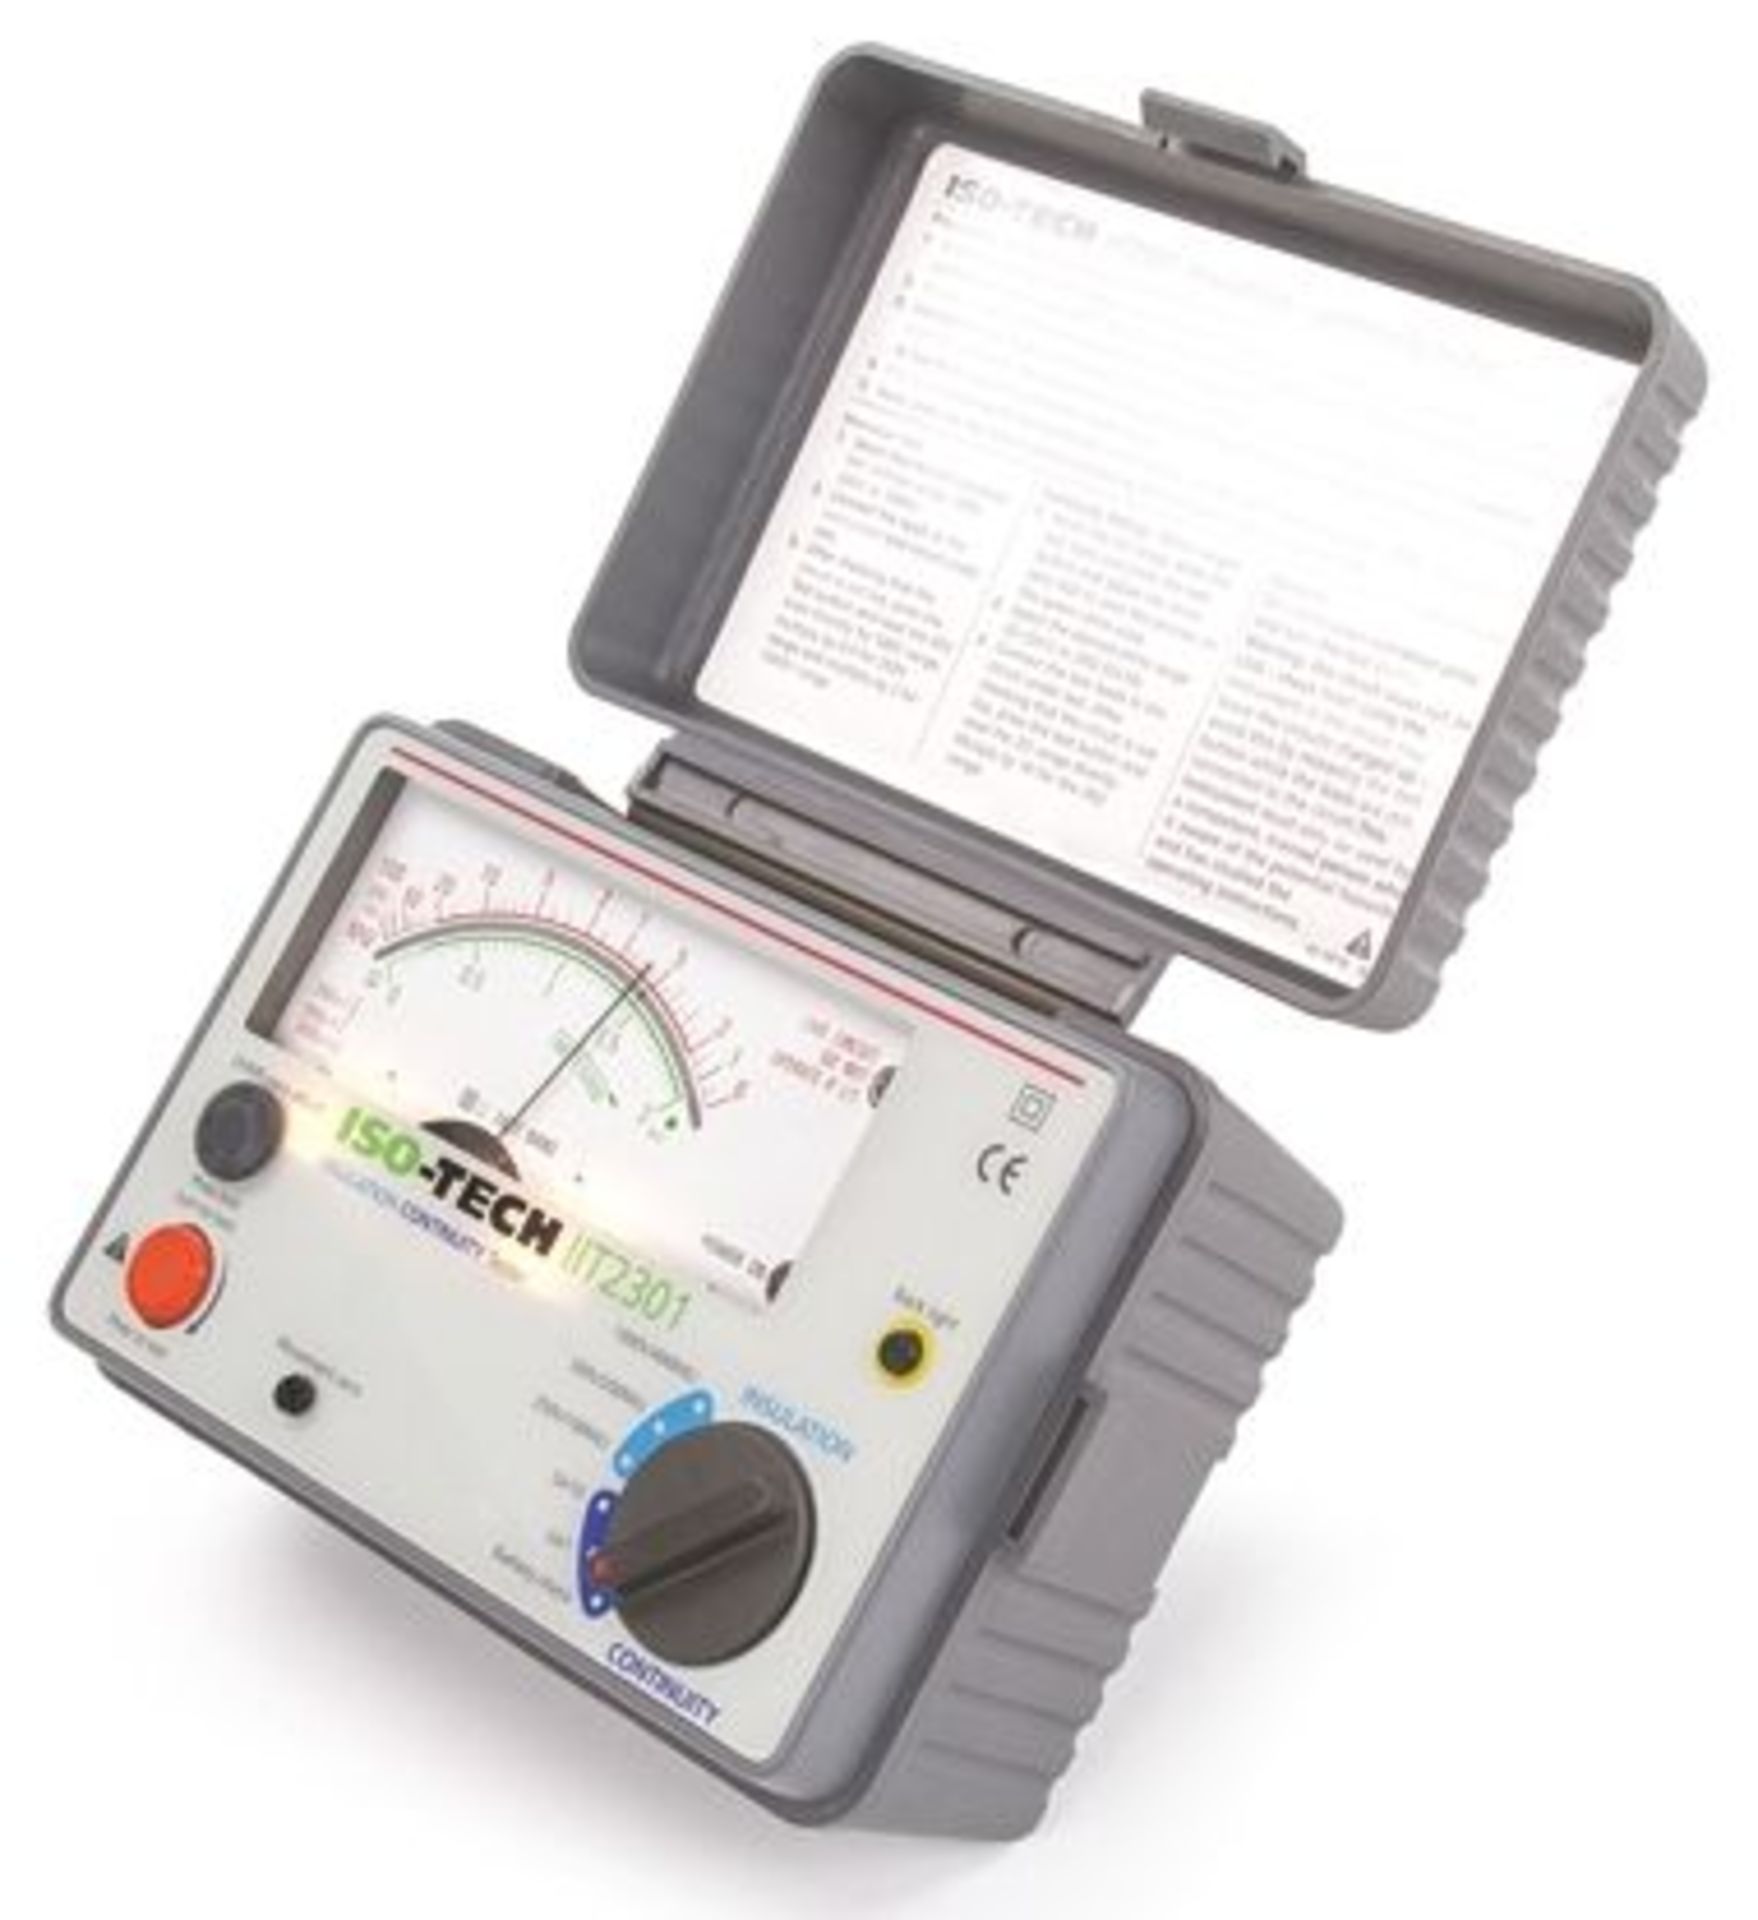 ISO-TECH IIT2301 Analogue Insulation / Continuity Tester 400MΩ CAT III 300V